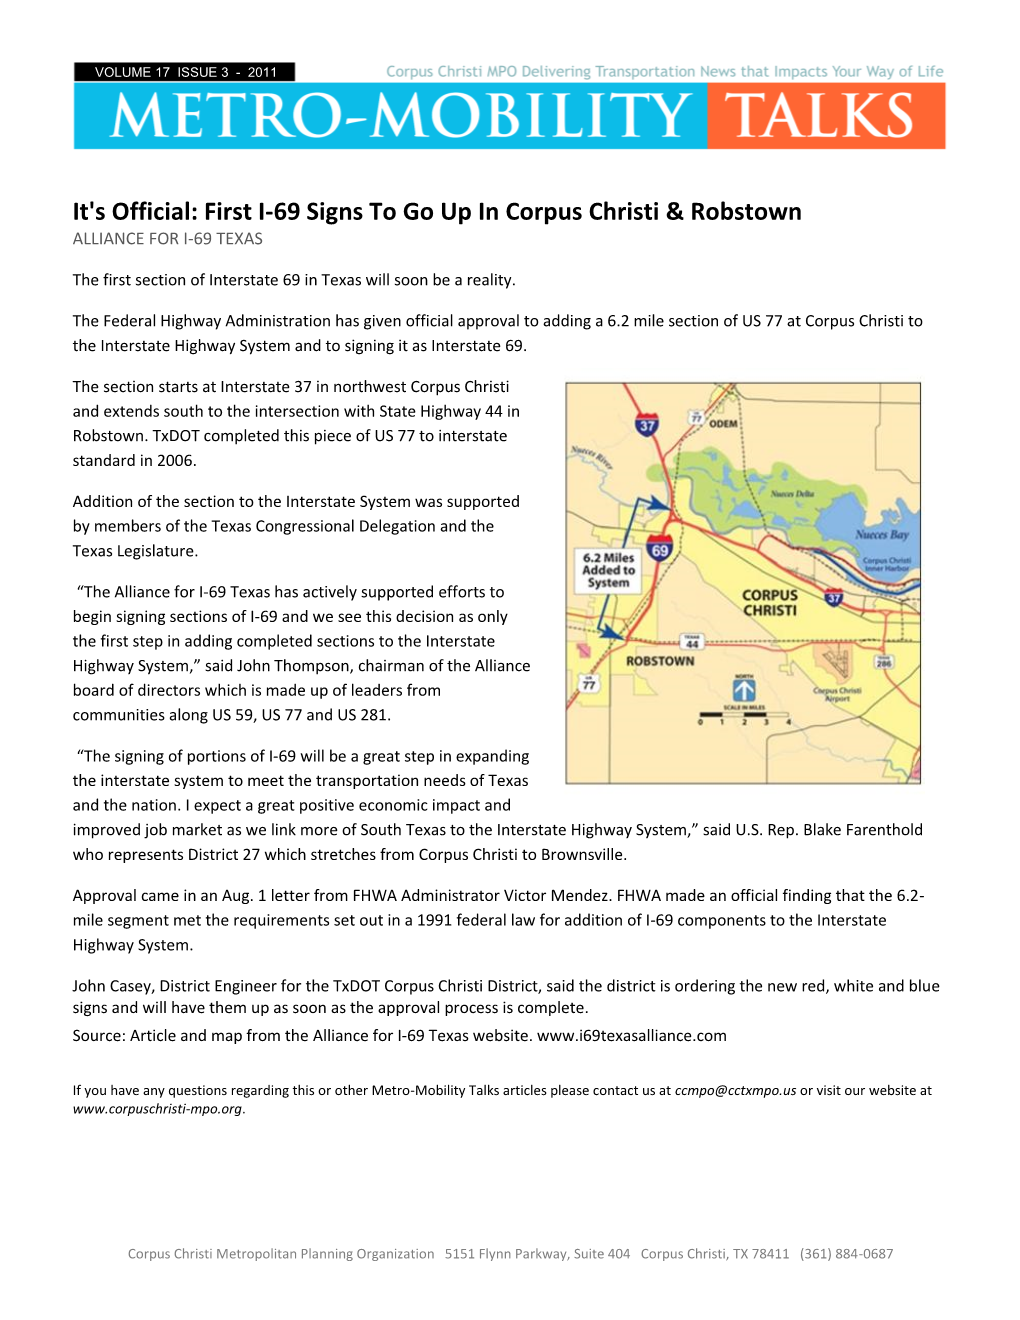 First I-69 Signs to Go up in Corpus Christi & Robstown